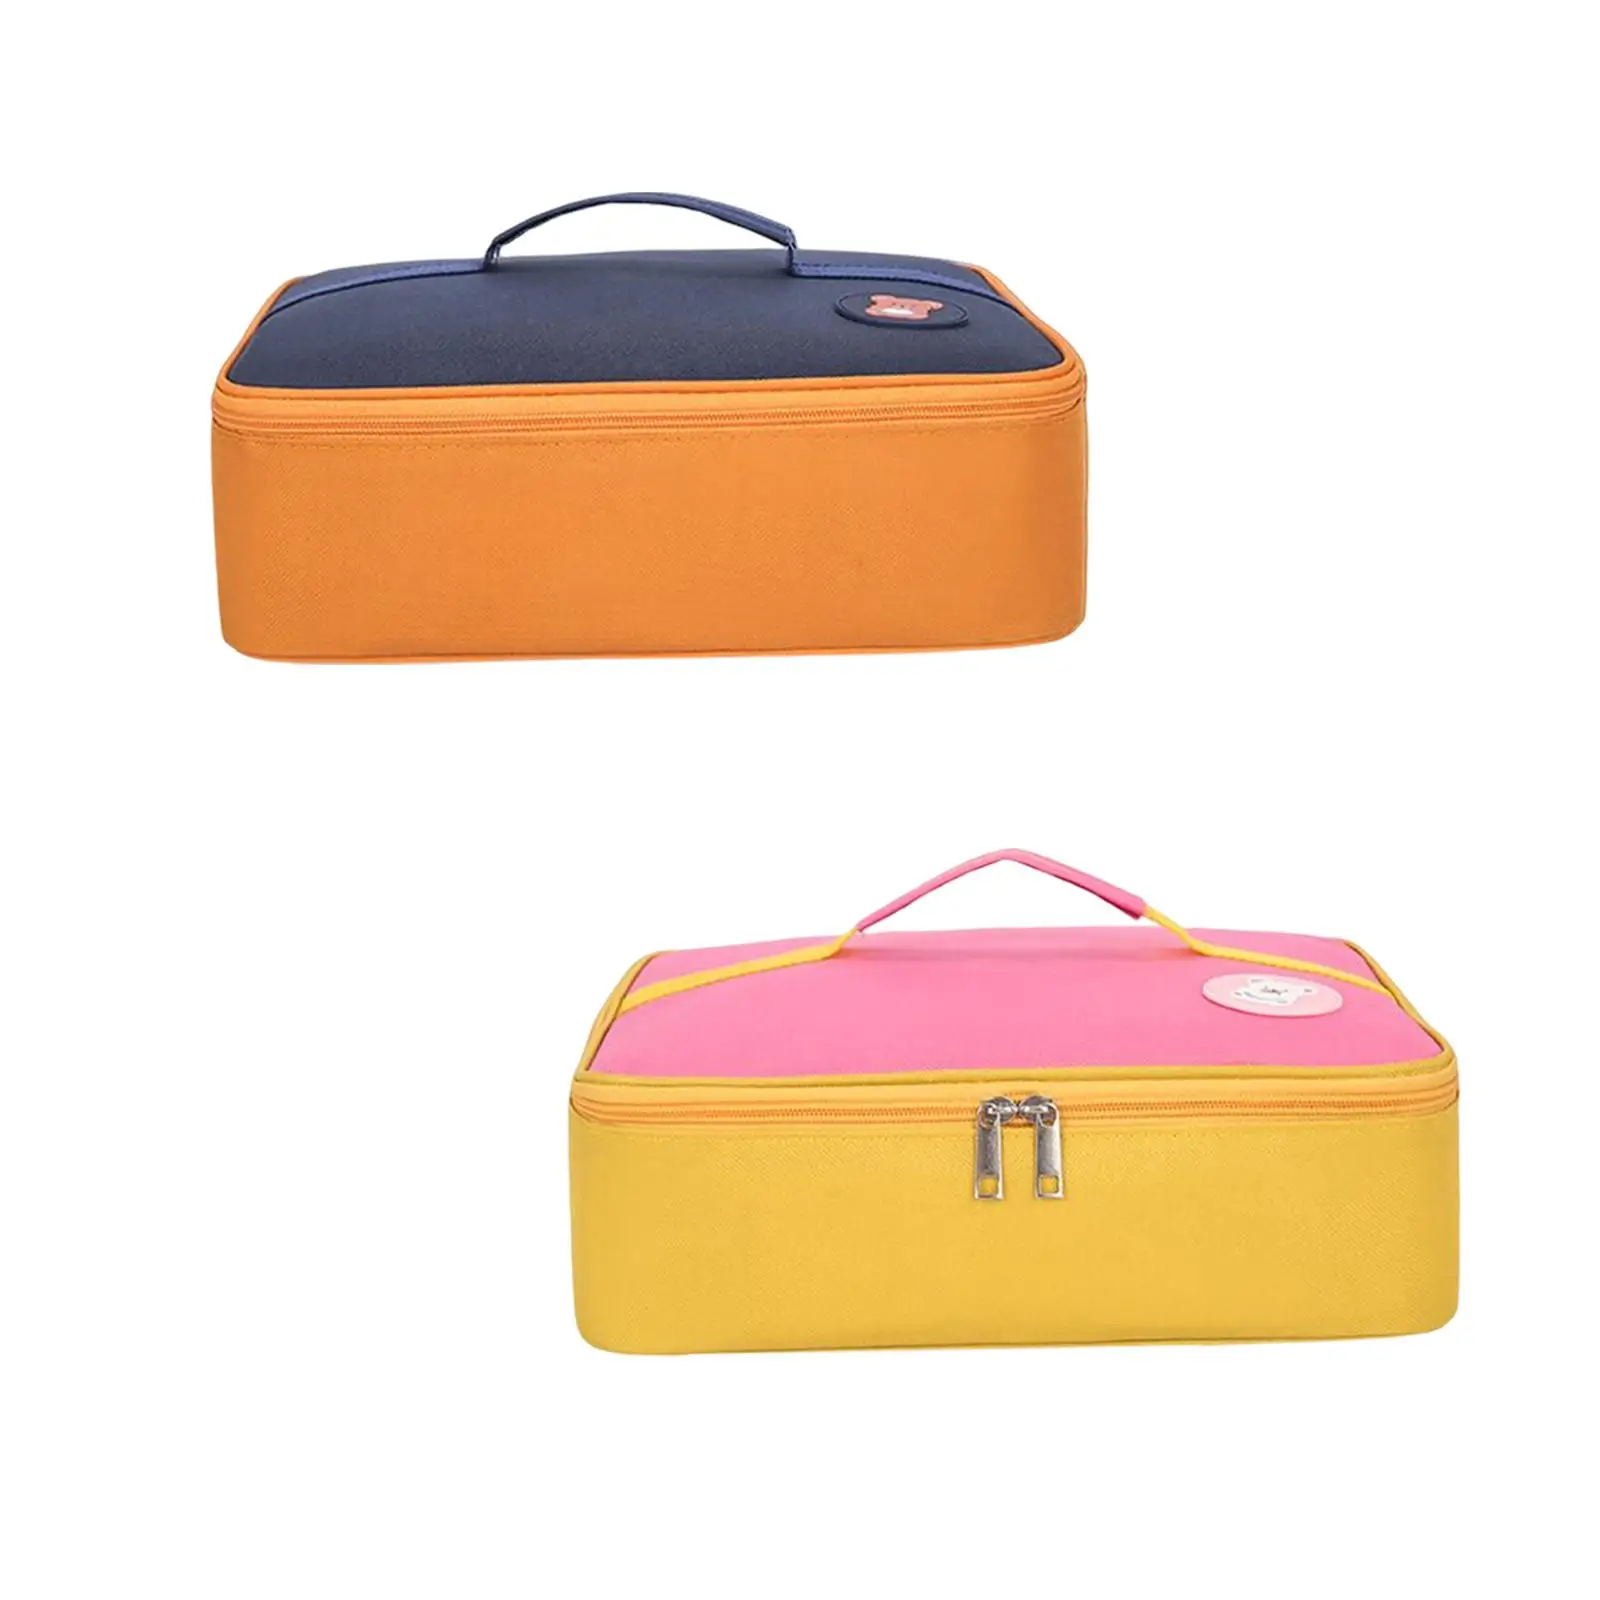 Portable  Thermal Insulated Cooler Bag Exquisite Sewing Smooth Zipper  Food Containers Universal Size Durable